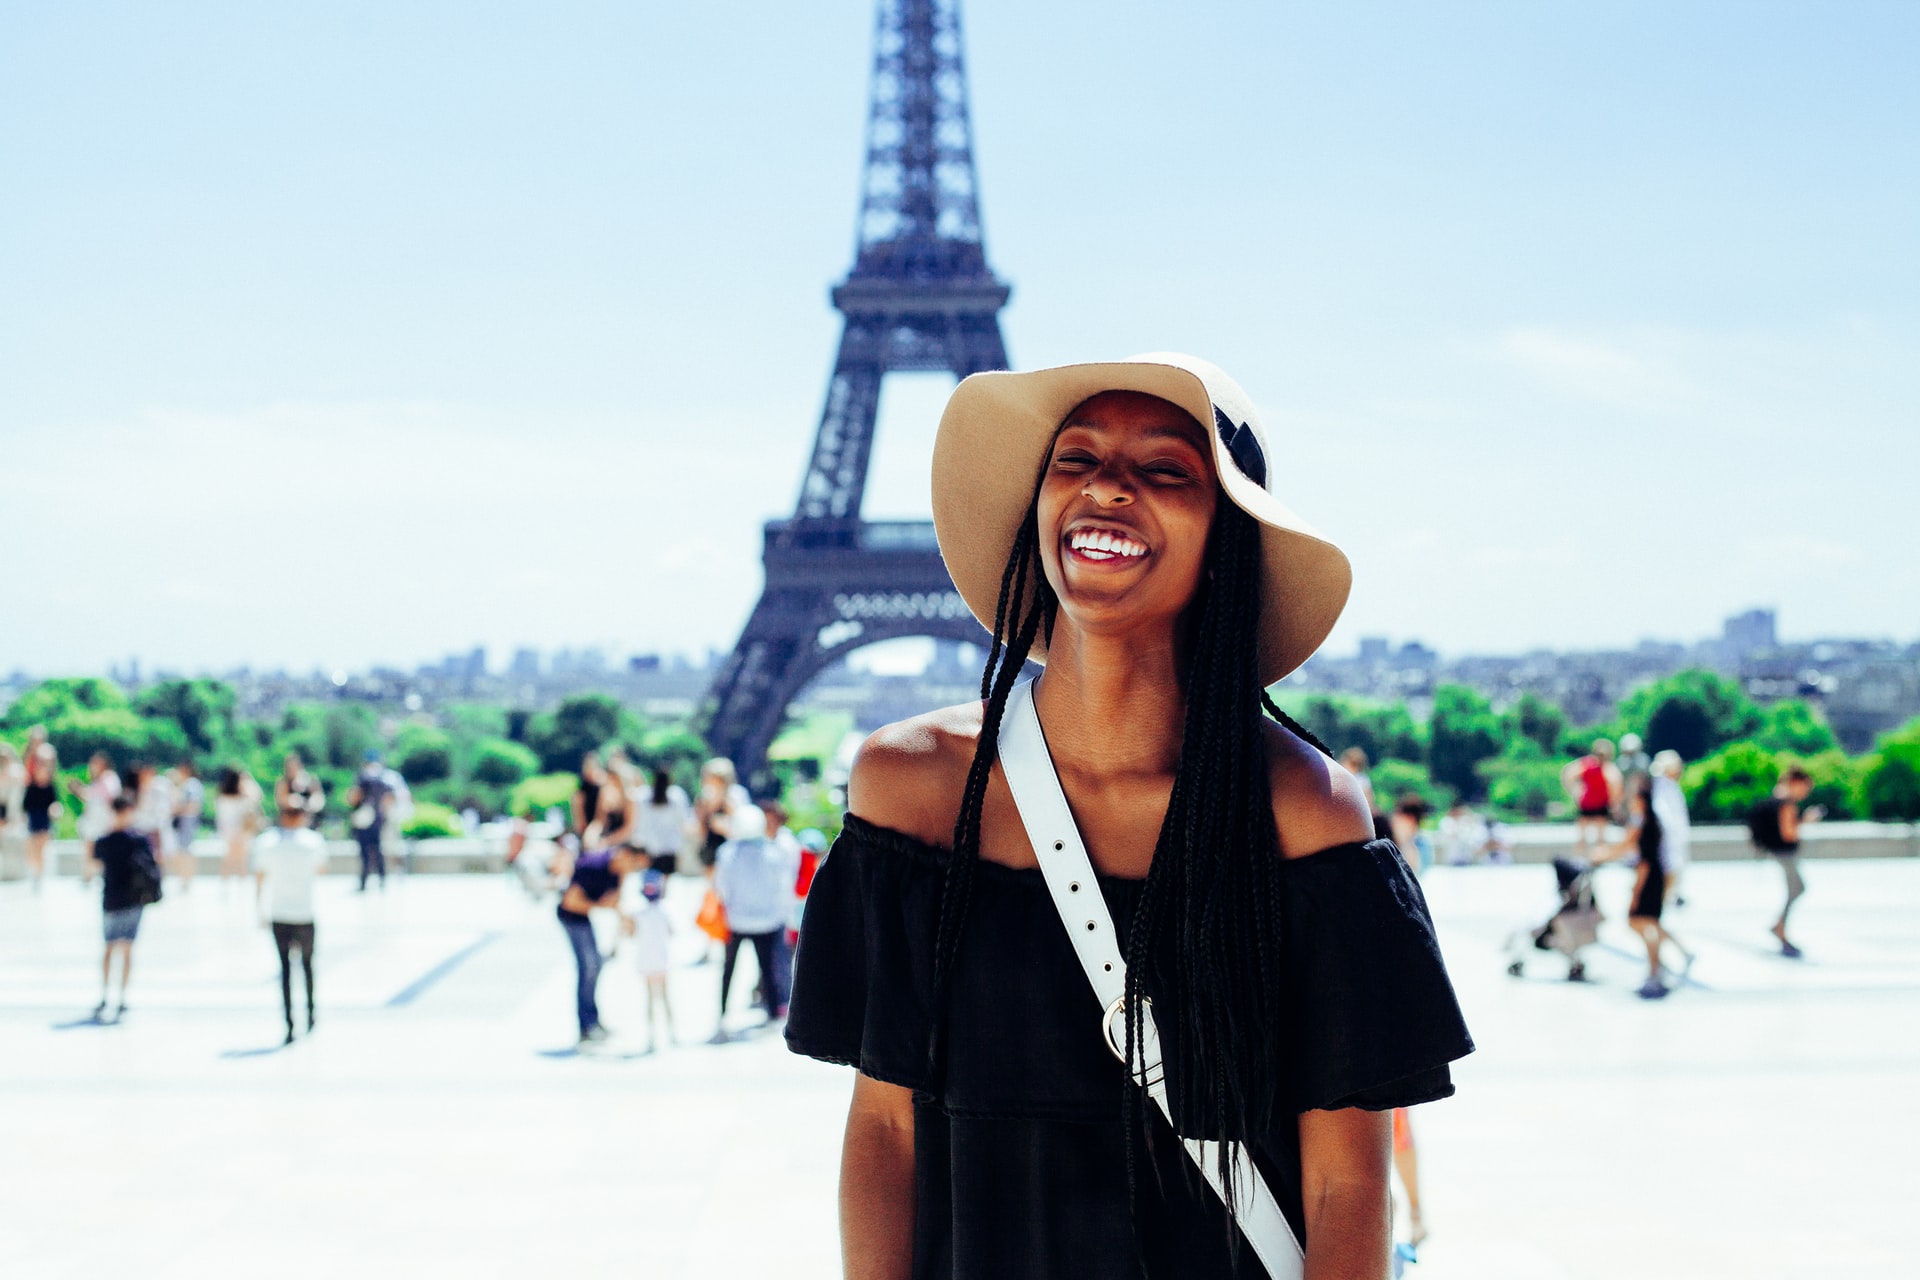 West Georgia female student standing in front of the Eiffel Tower.